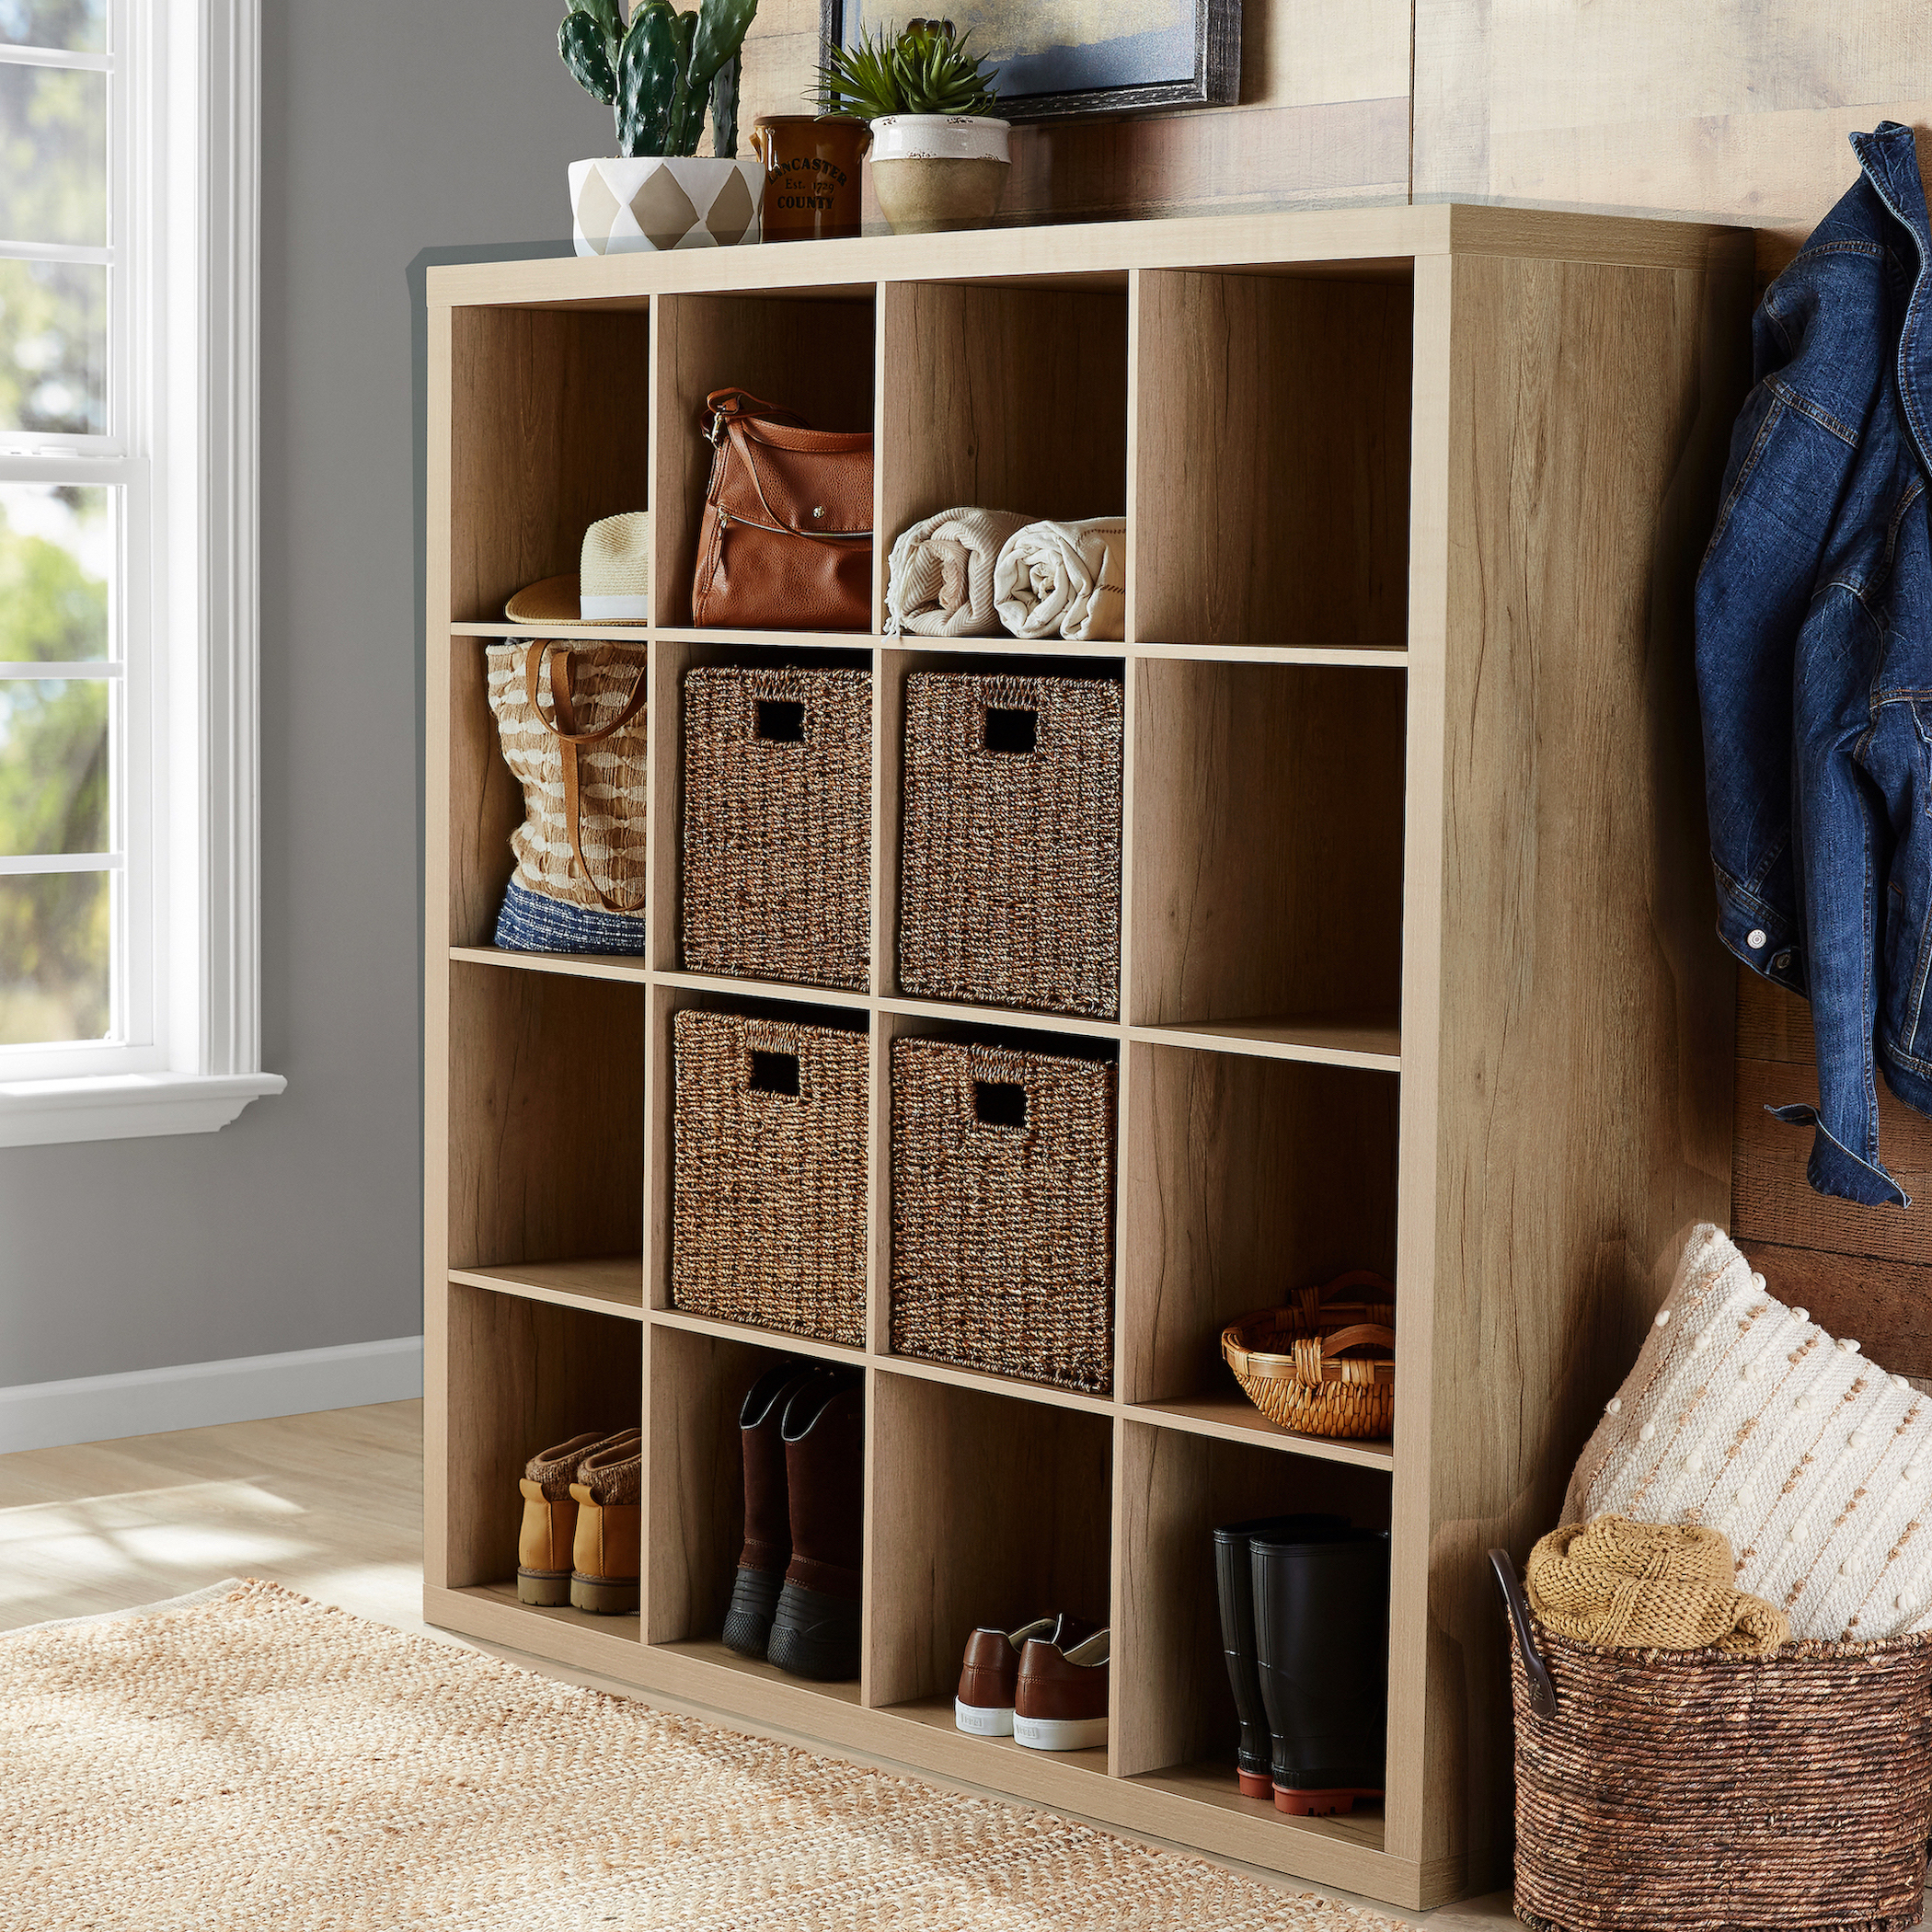 Better Homes & Gardens 16-Cube Storage Organizer, Natural - image 3 of 6